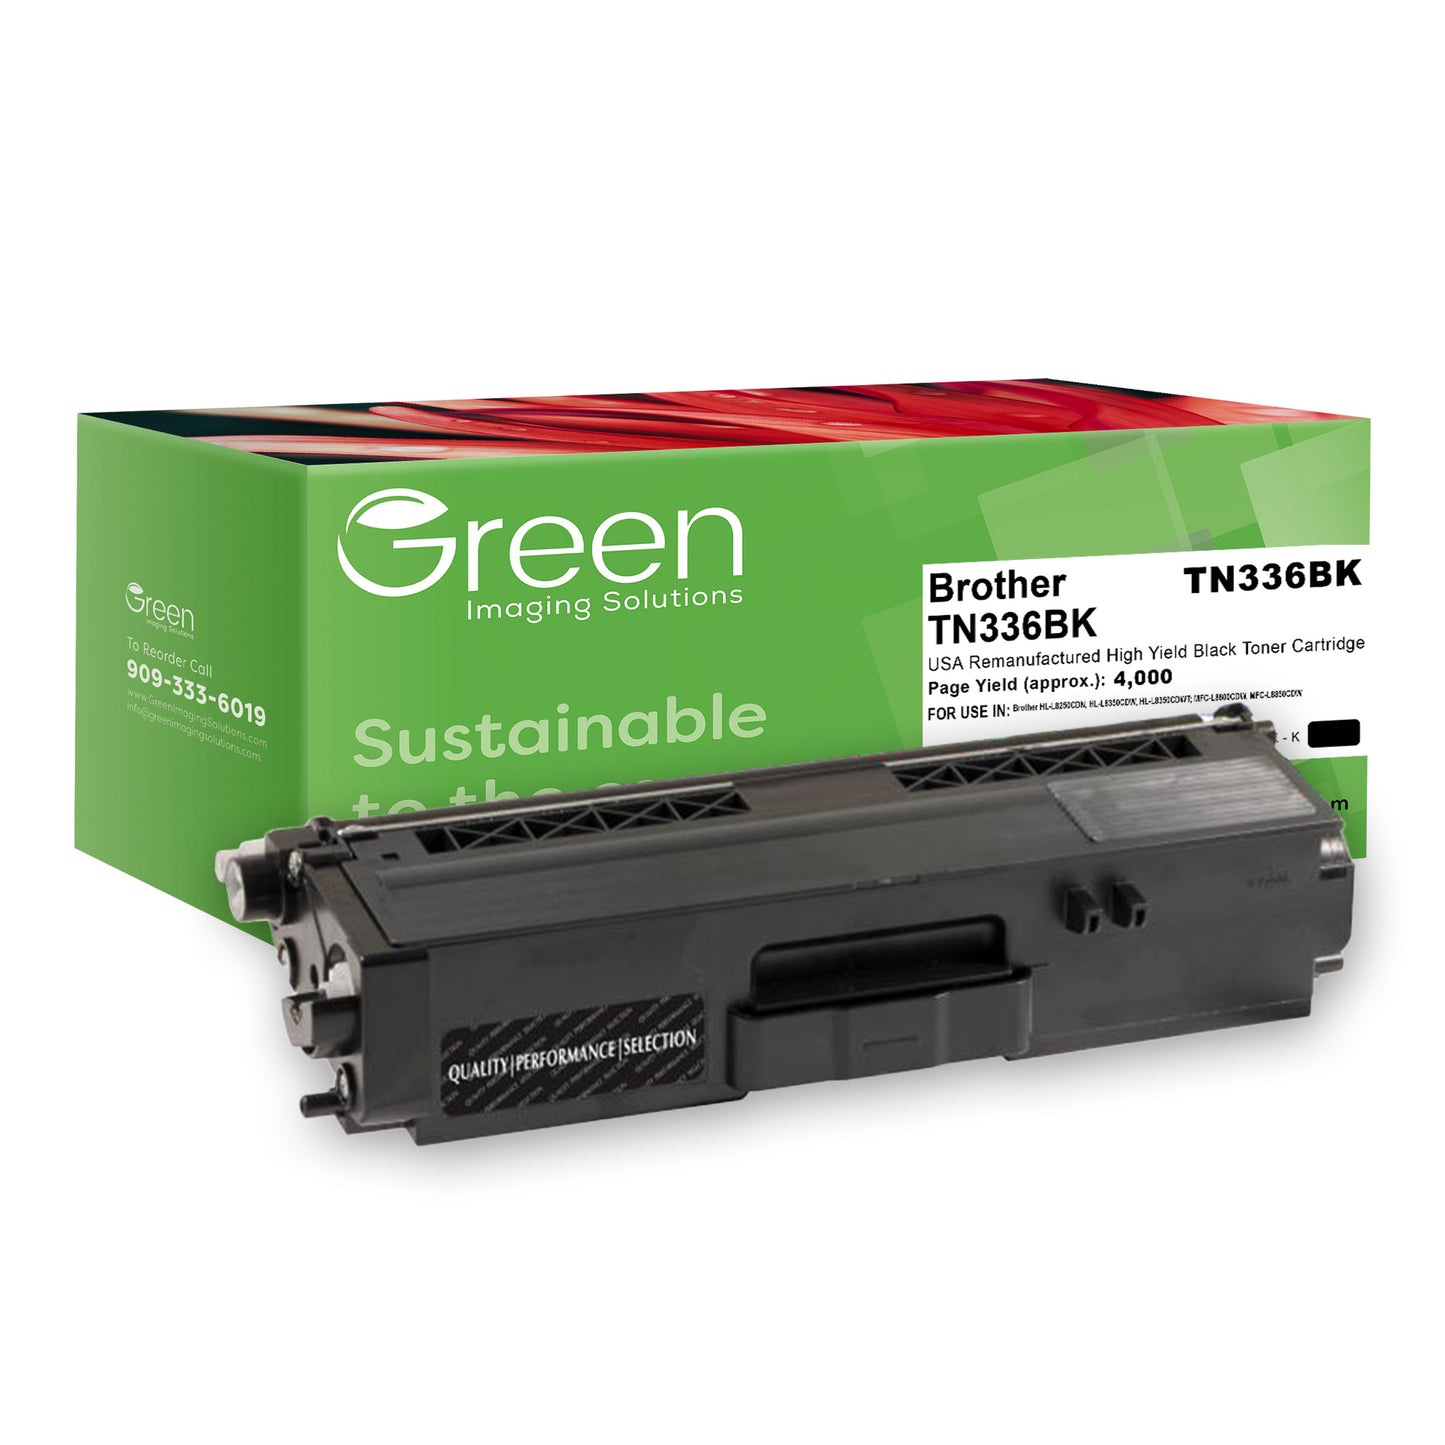 Green Imaging Solutions USA Remanufactured High Yield Black Toner Cartridge for Brother TN336